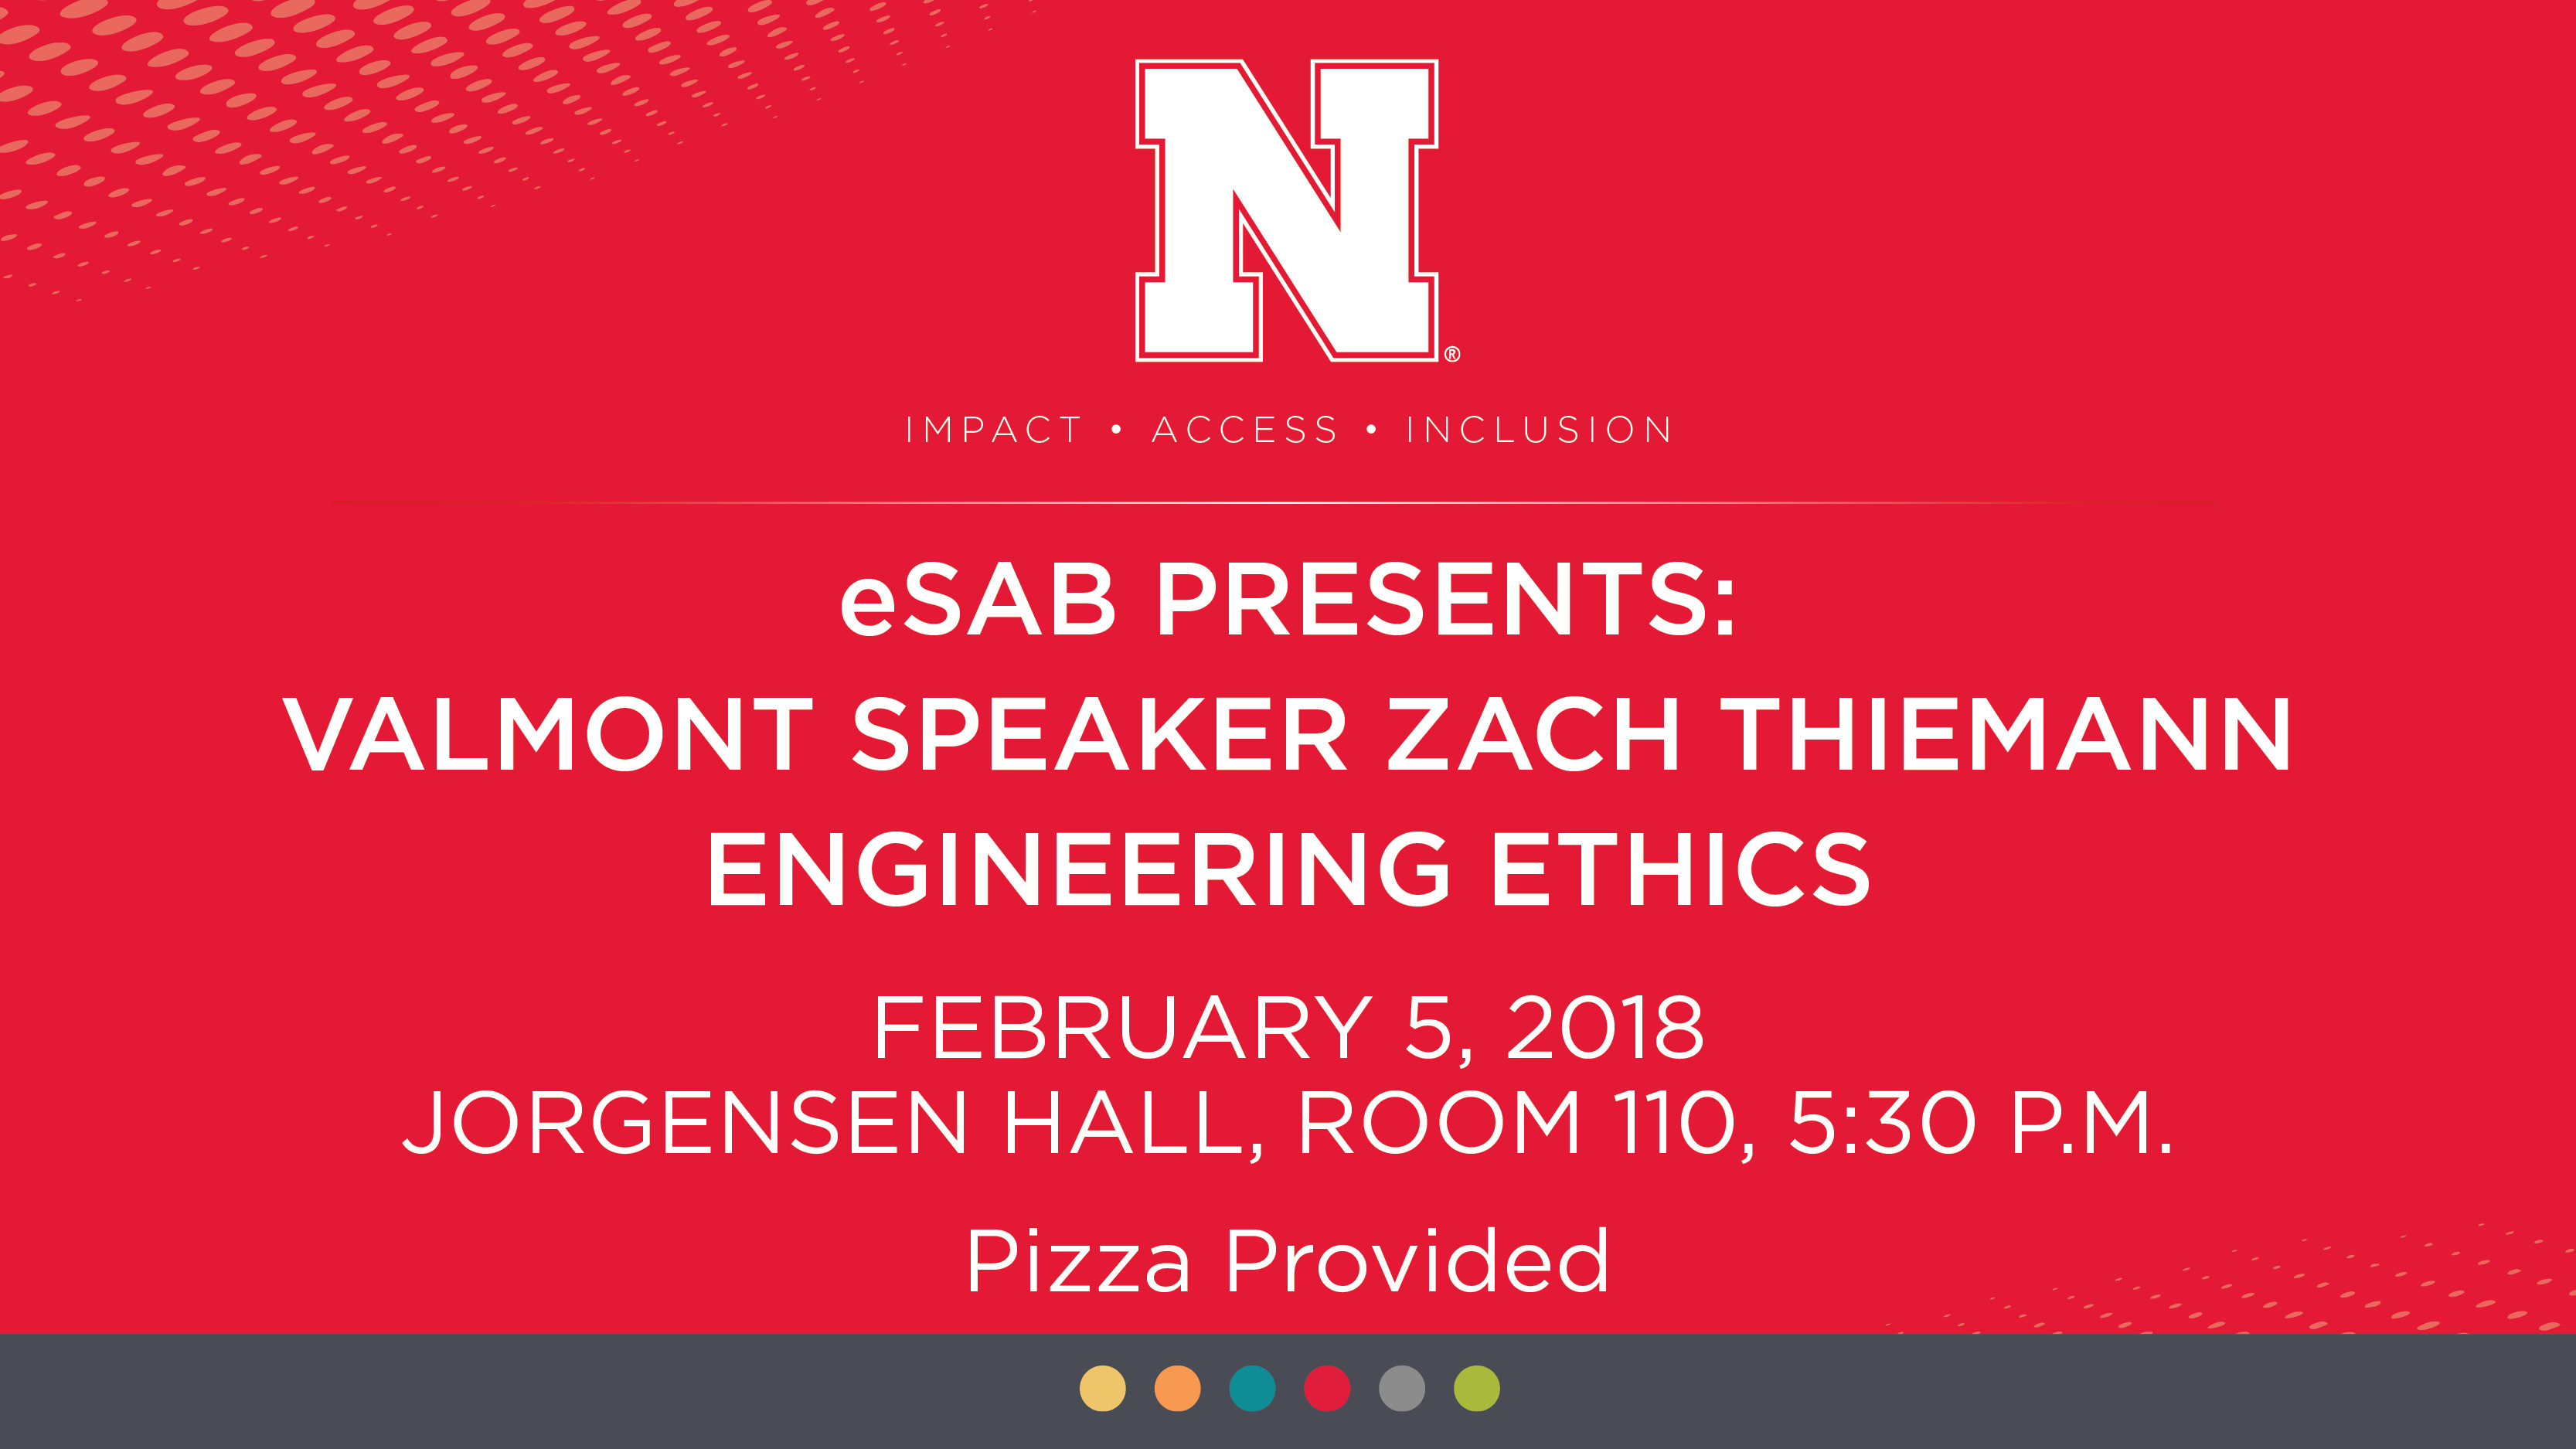 Engineering Ethics discussion today at 5:30 p.m.